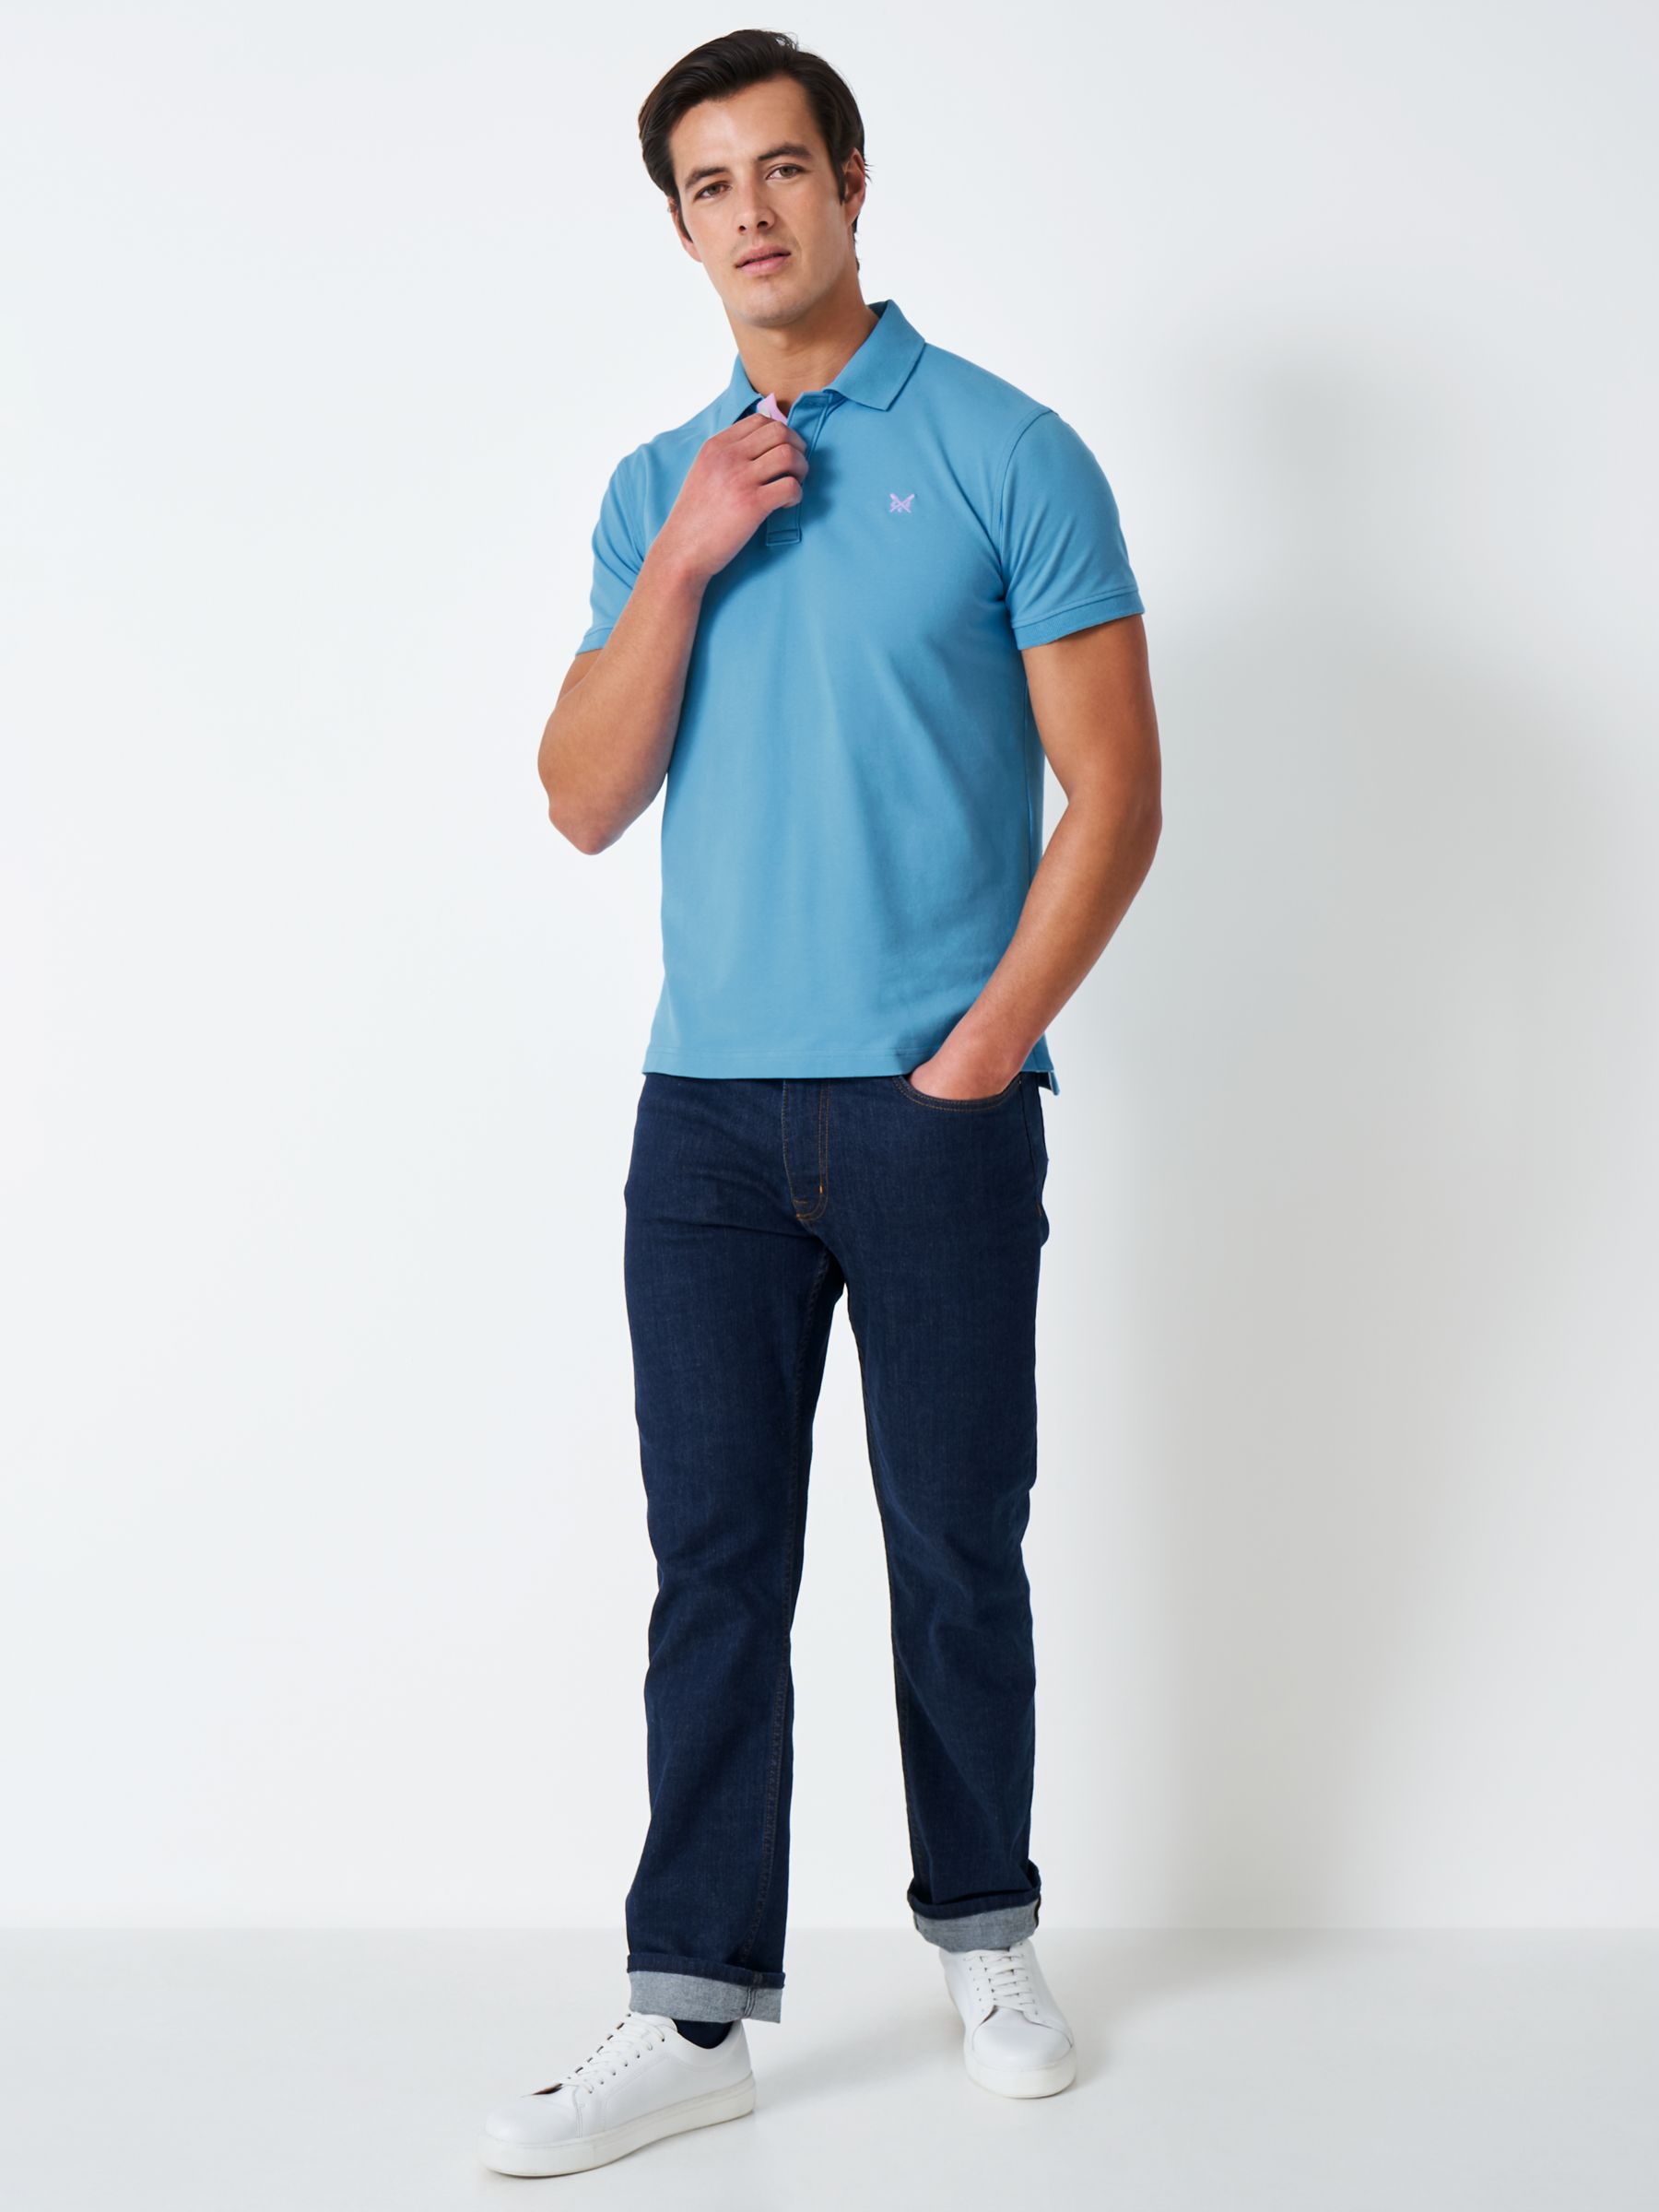 John Crew Short Clothing Top, Sleeve at Bright Piqué & Blue Lewis Partners Polo